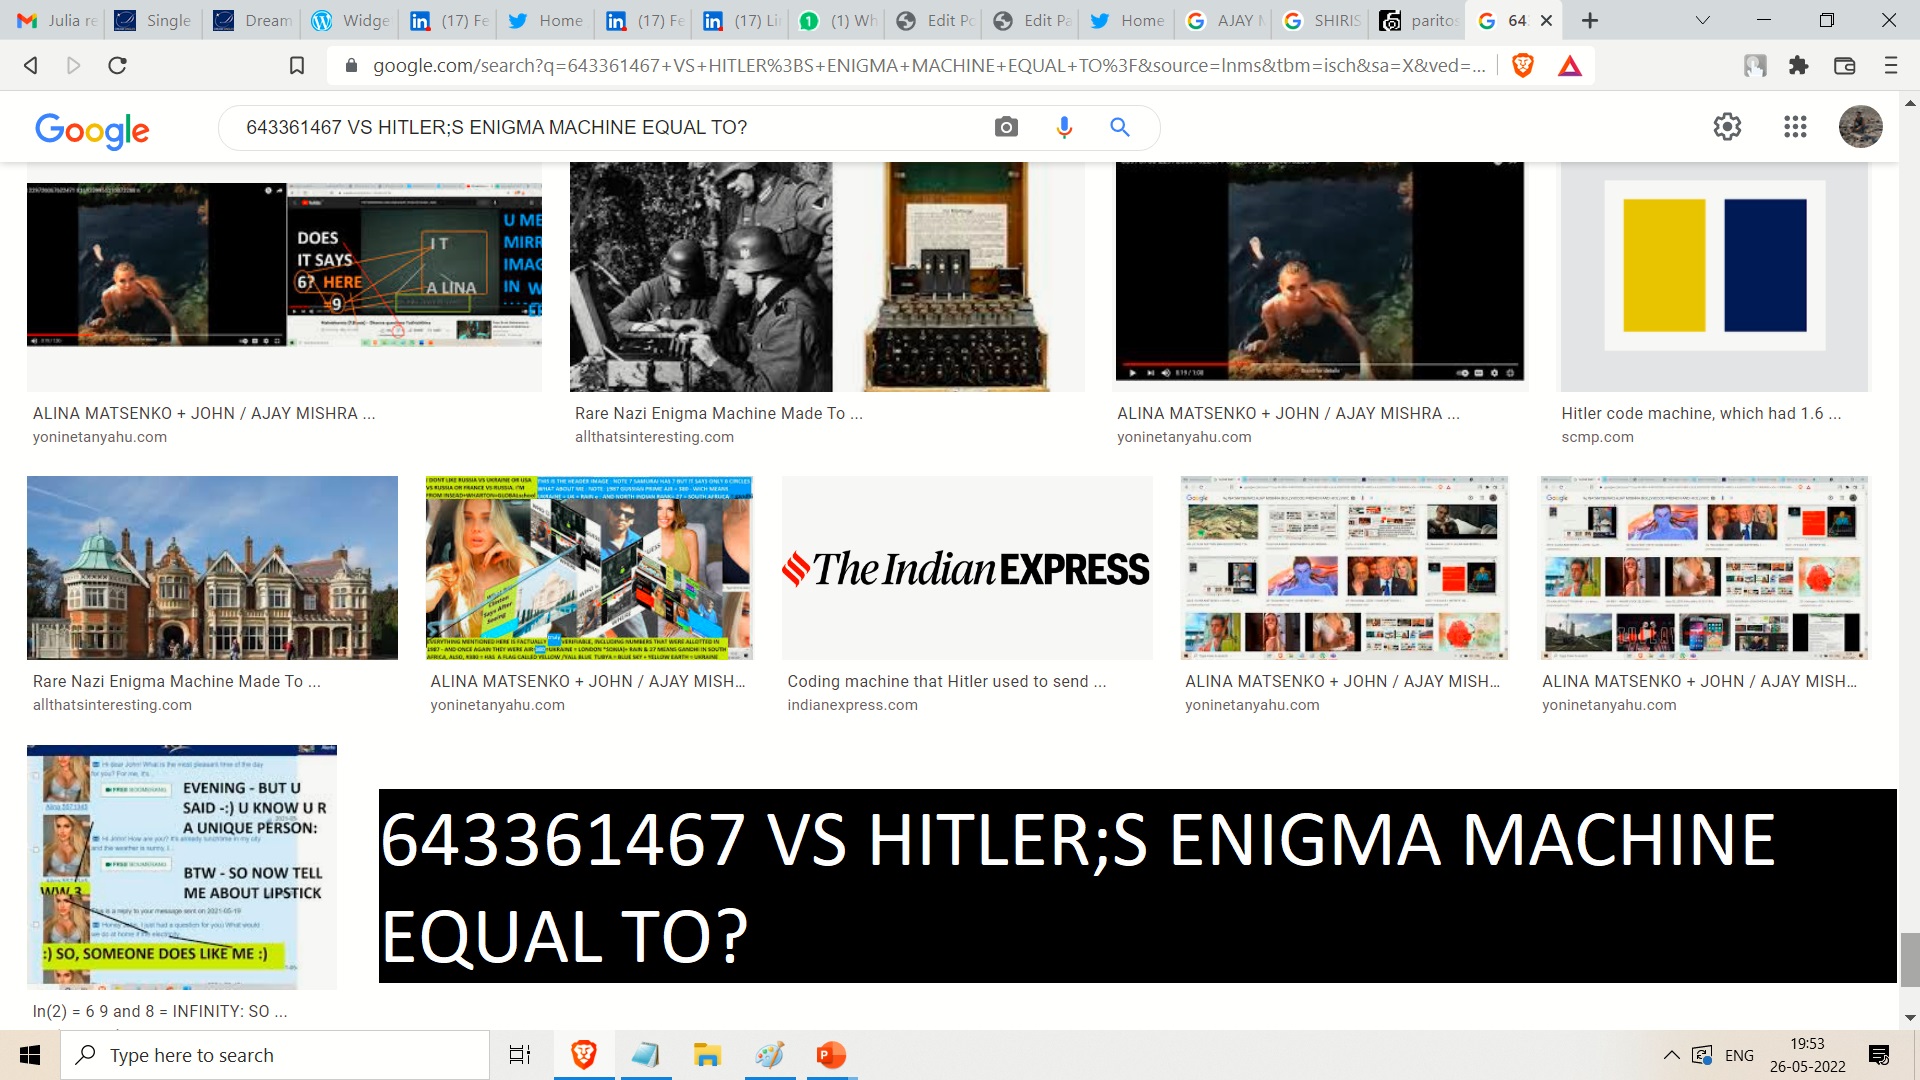 643361467 VS HITLER;S ENIGMA MACHINE EQUAL TO ---